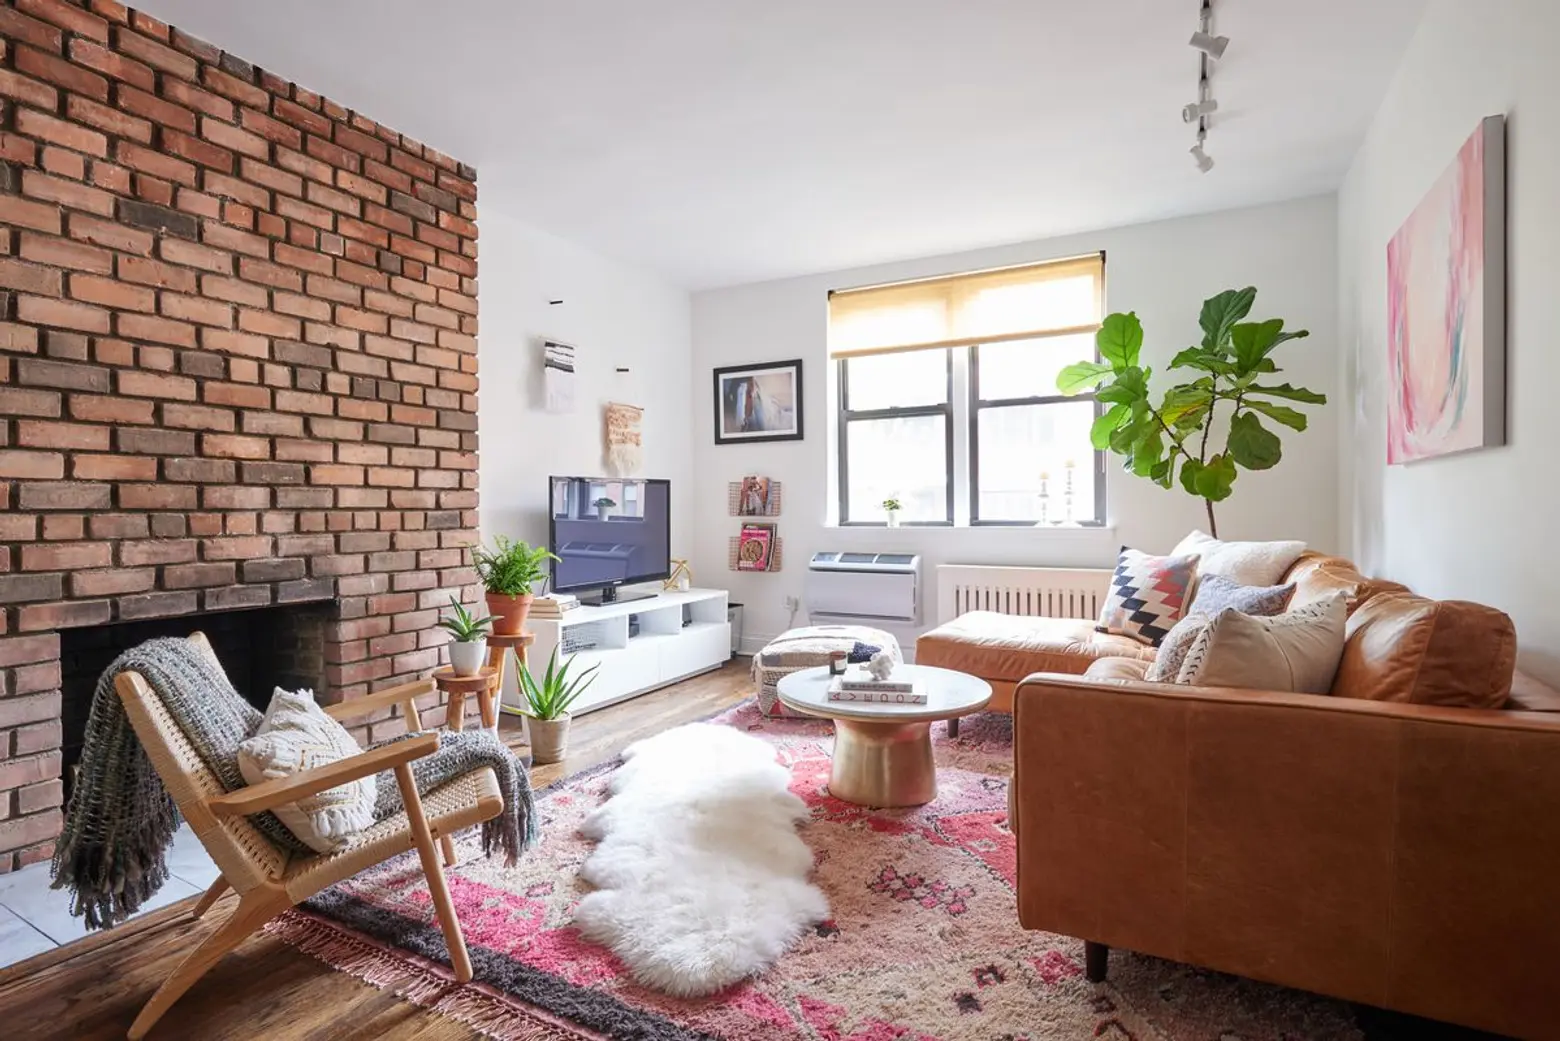 Cozy Chelsea co-op with a ’70s vibe asks $975K